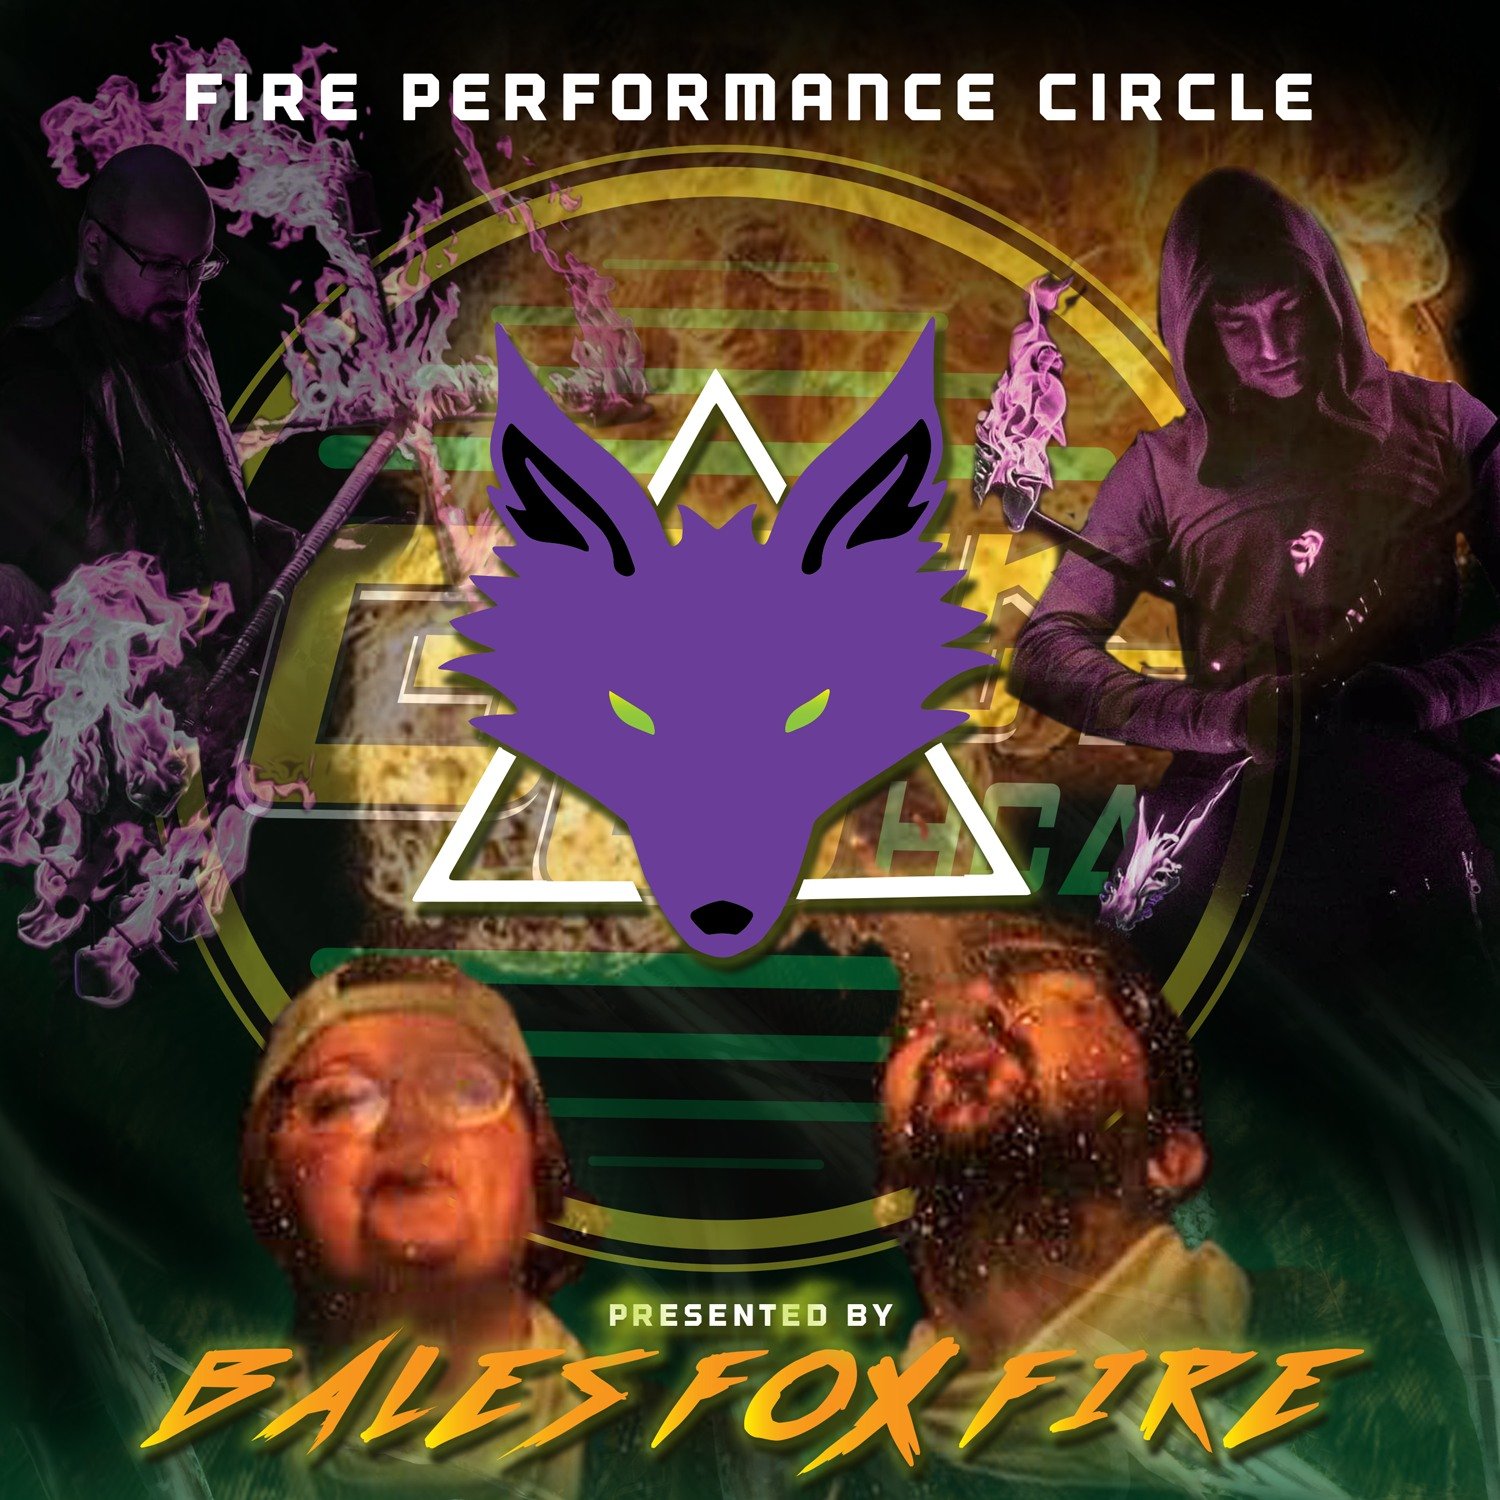   Bales Fox Fire is back and bending flames for our annual Fire Circle! Join us down in Middle Earth in front of Main stage as this collection of talented performers set the night ablaze in tandem with our live music!  Information:  - All performance